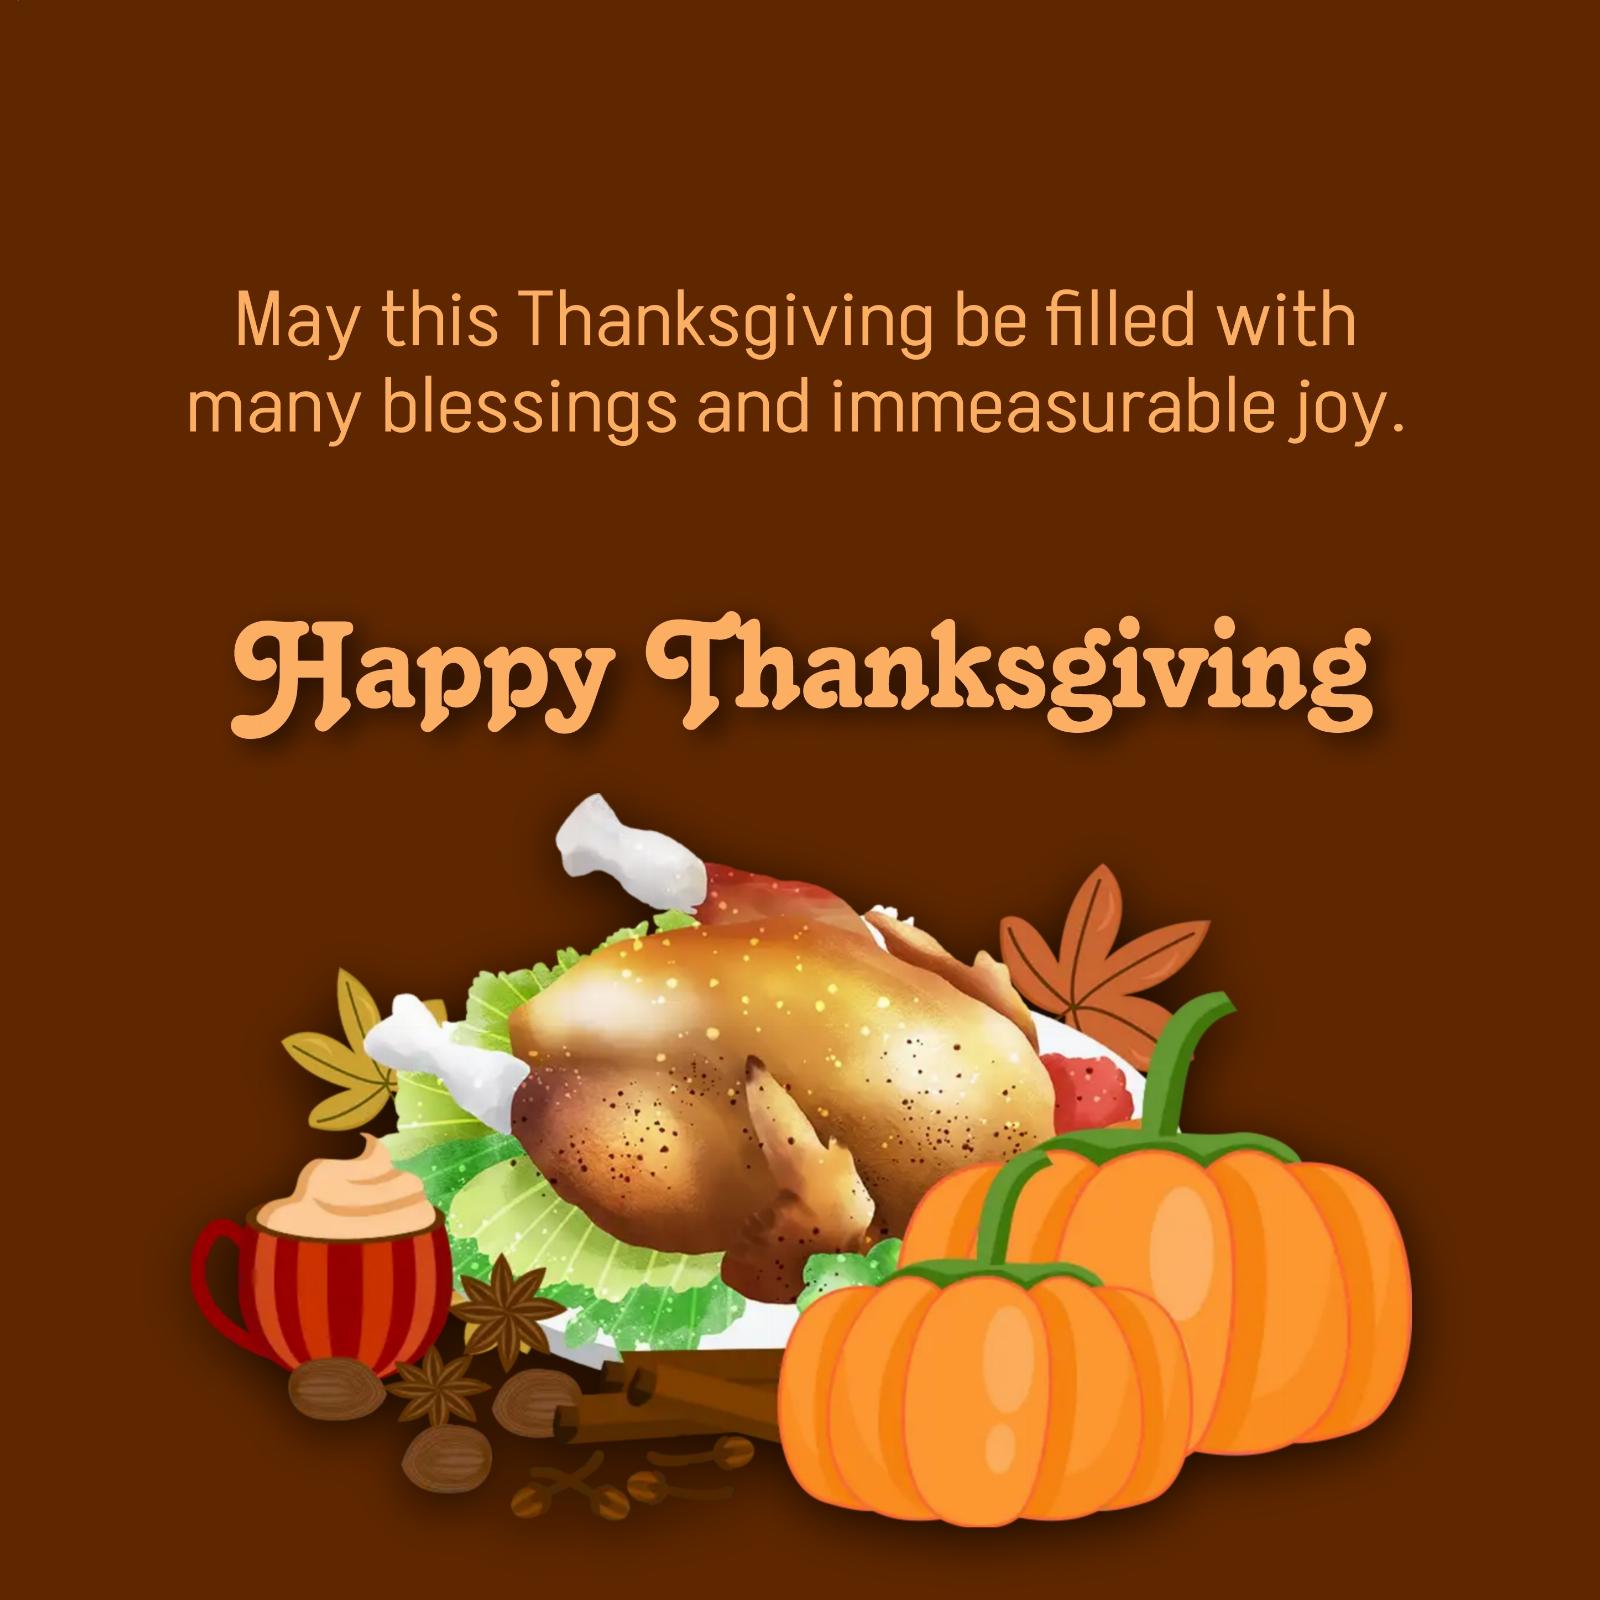 May this Thanksgiving be filled with many blessings and immeasurable joy